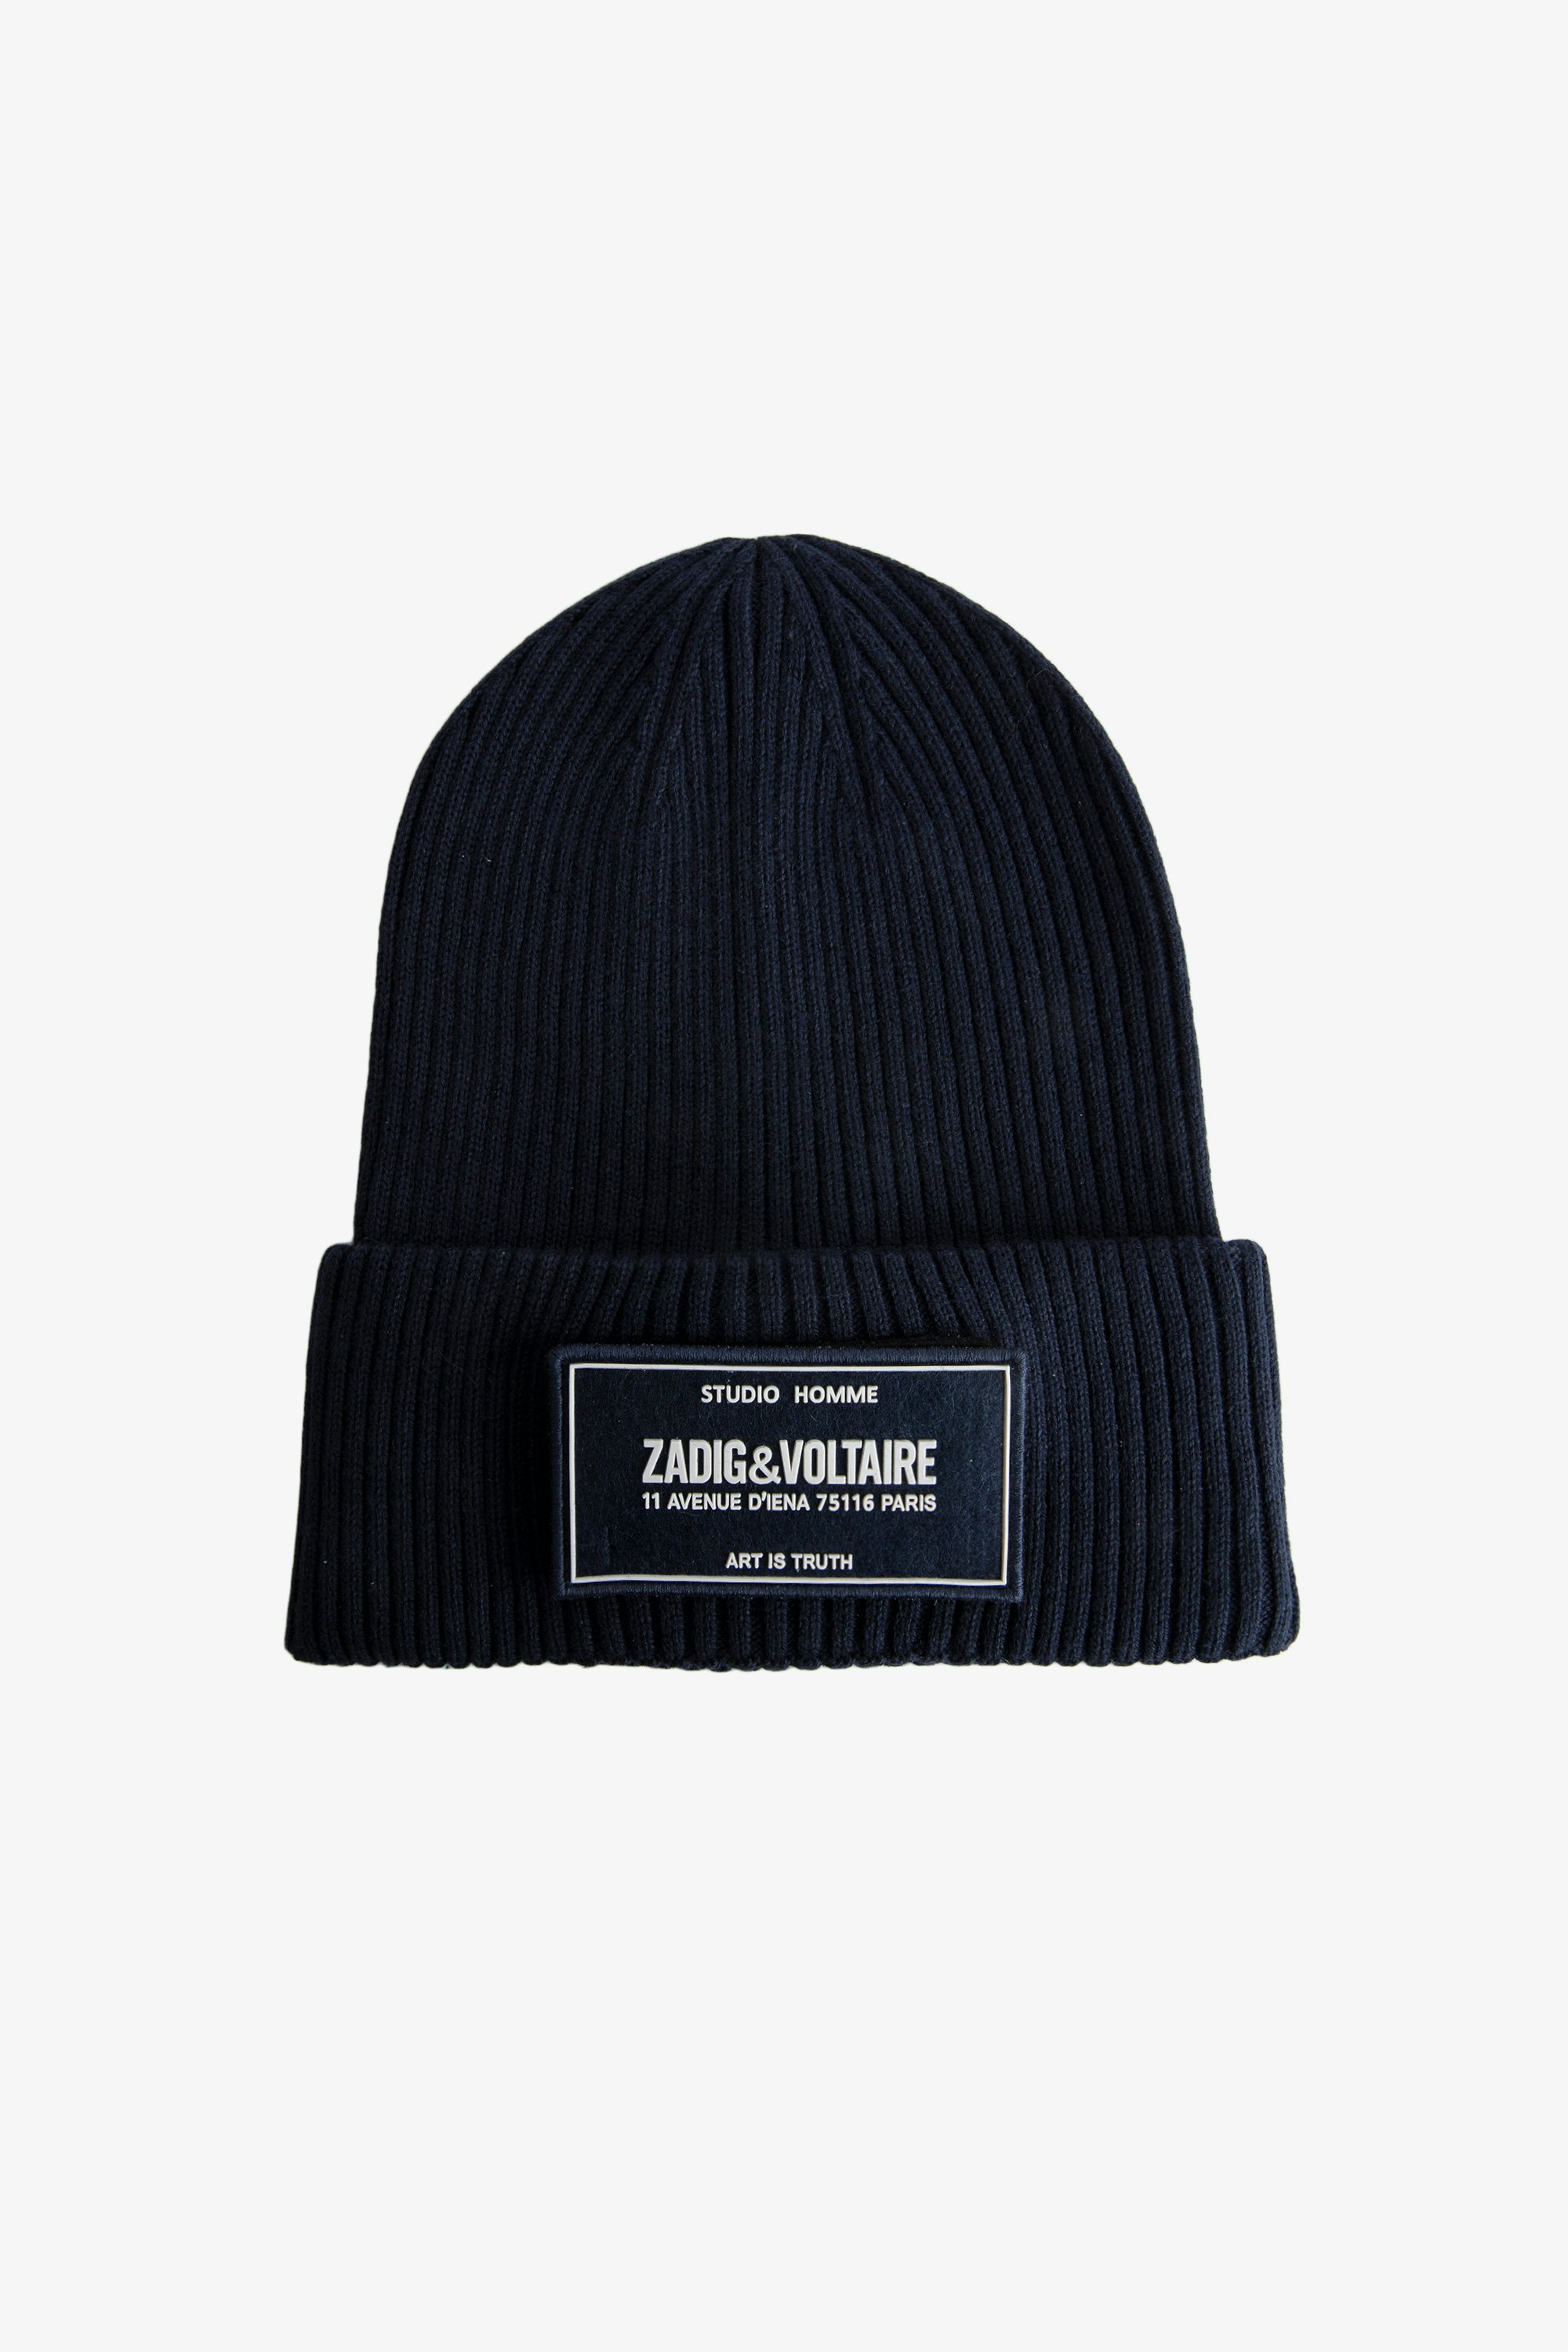 Tom Boys’ Beanie - Boys’ navy blue cotton and wool baseball cap with removable badge and embroidered label.